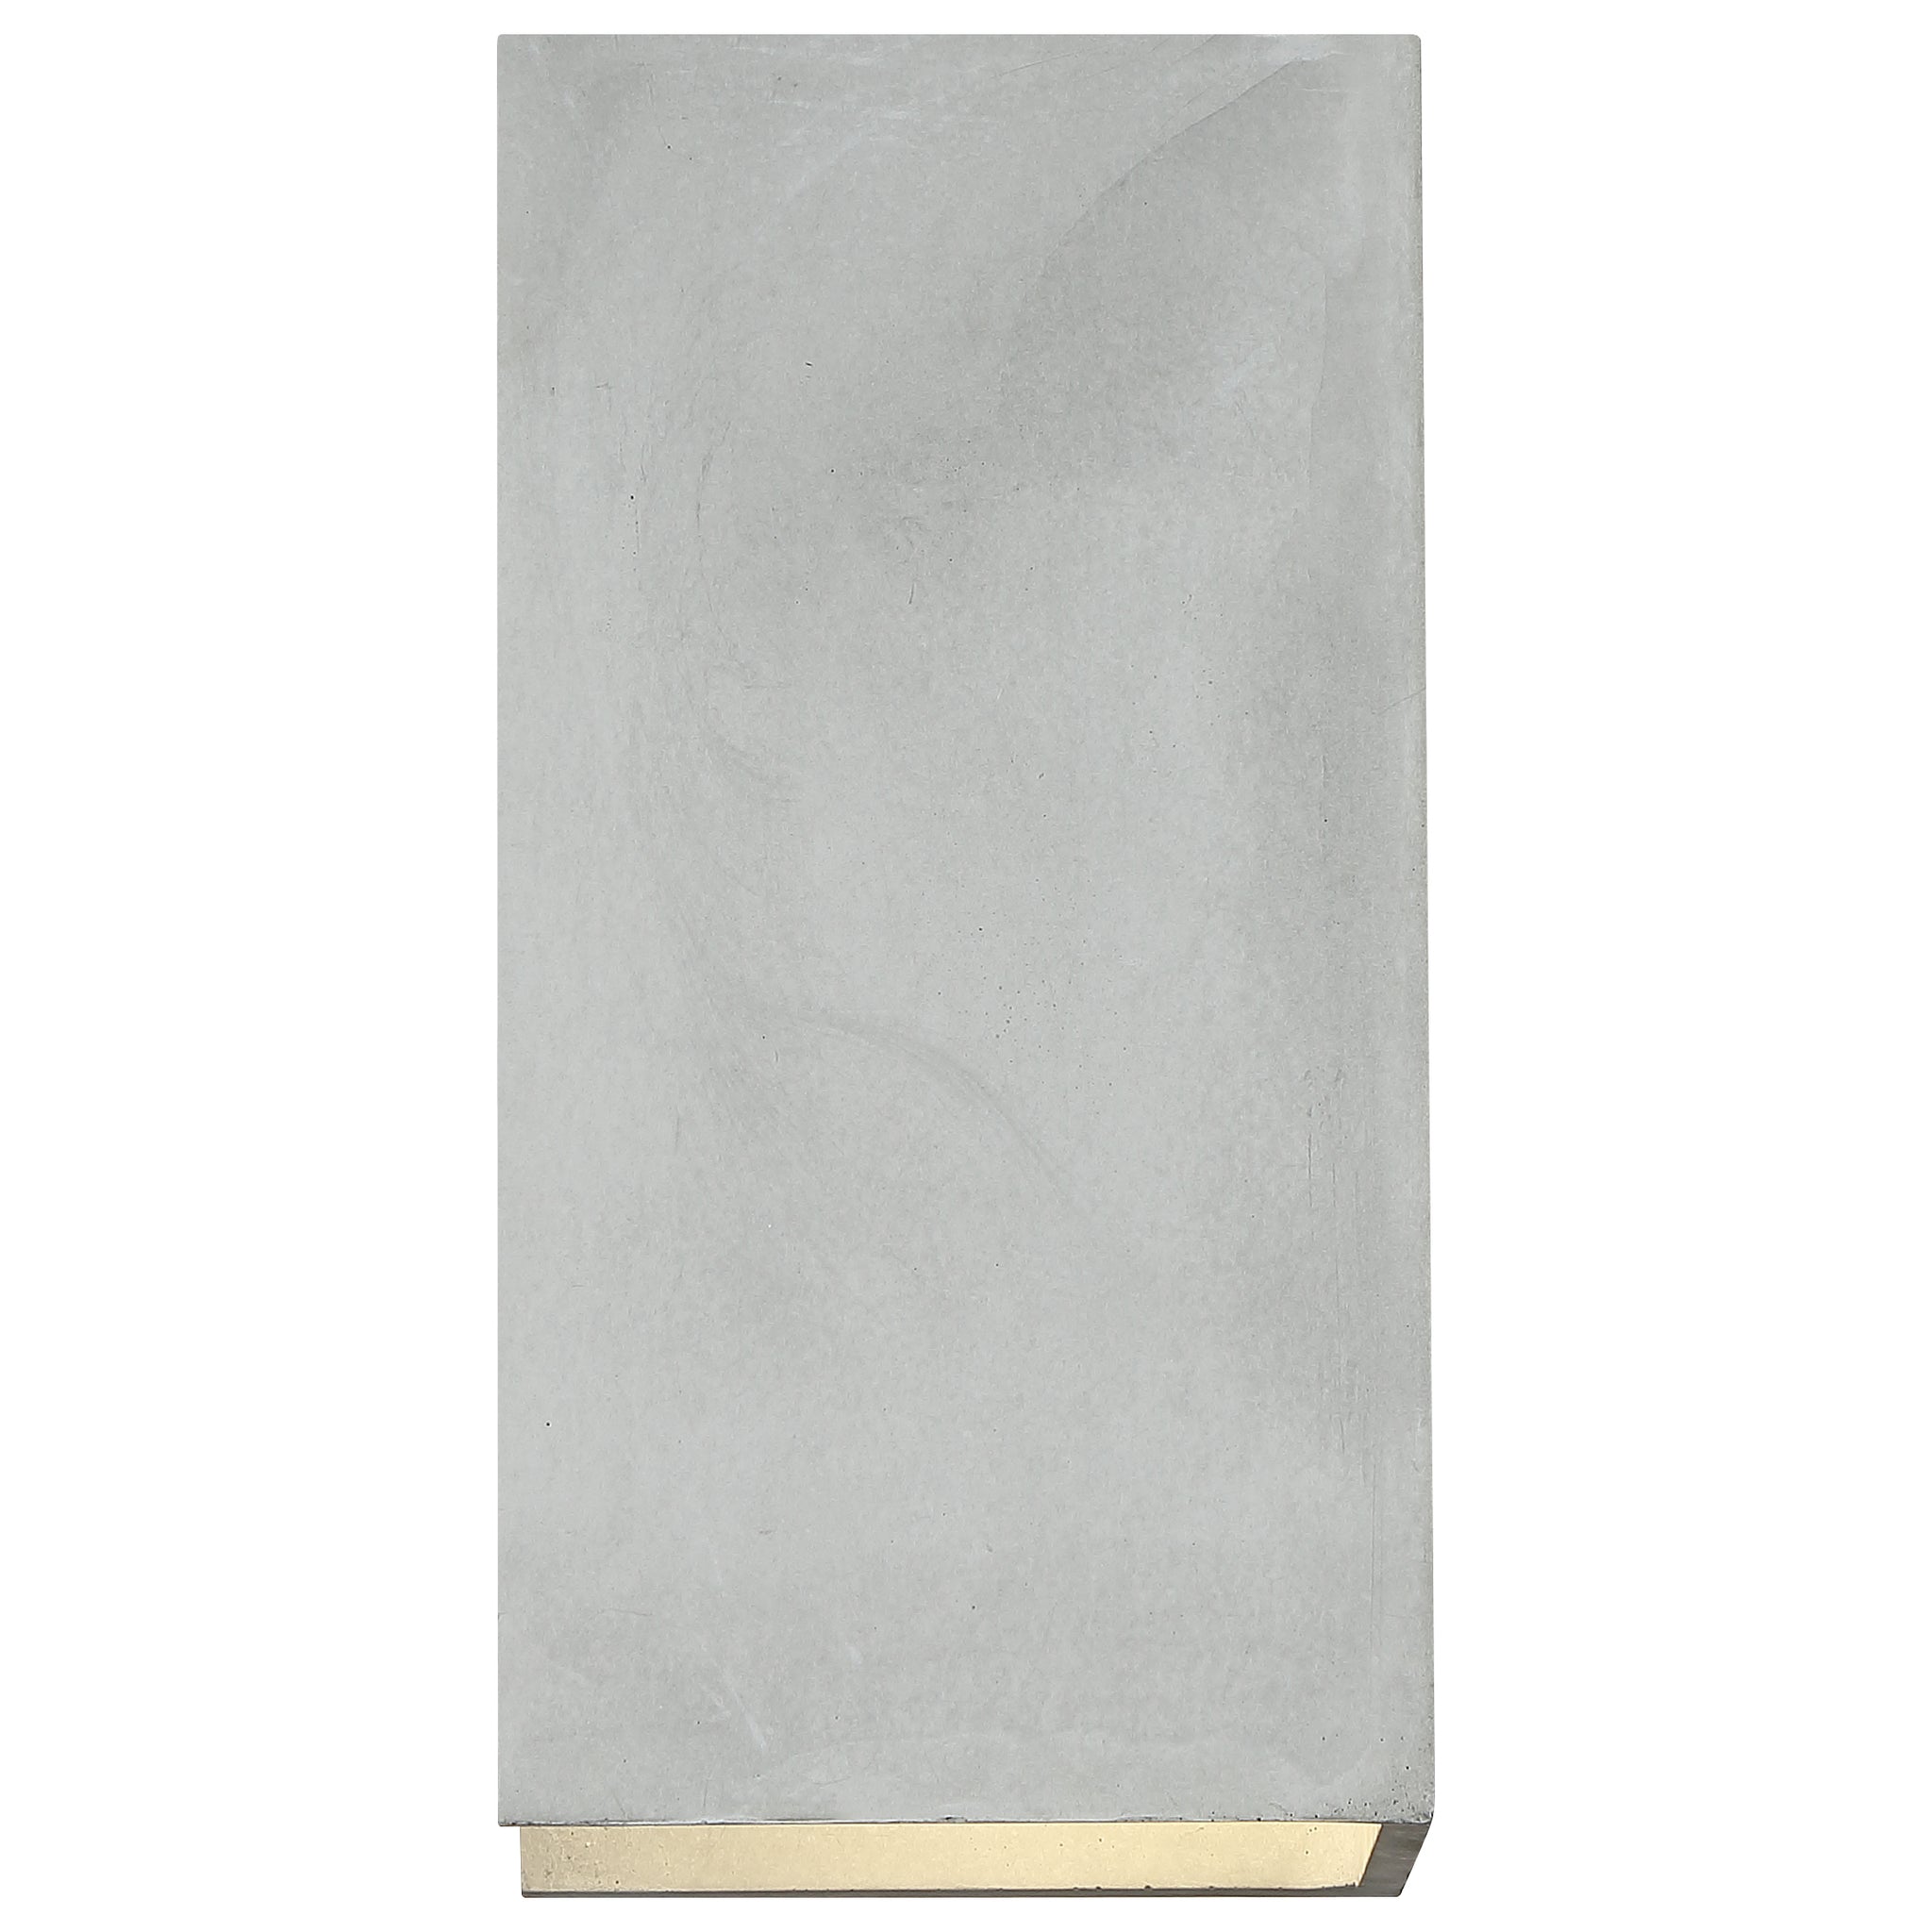 District Outdoor Wall Light Concrete Grey